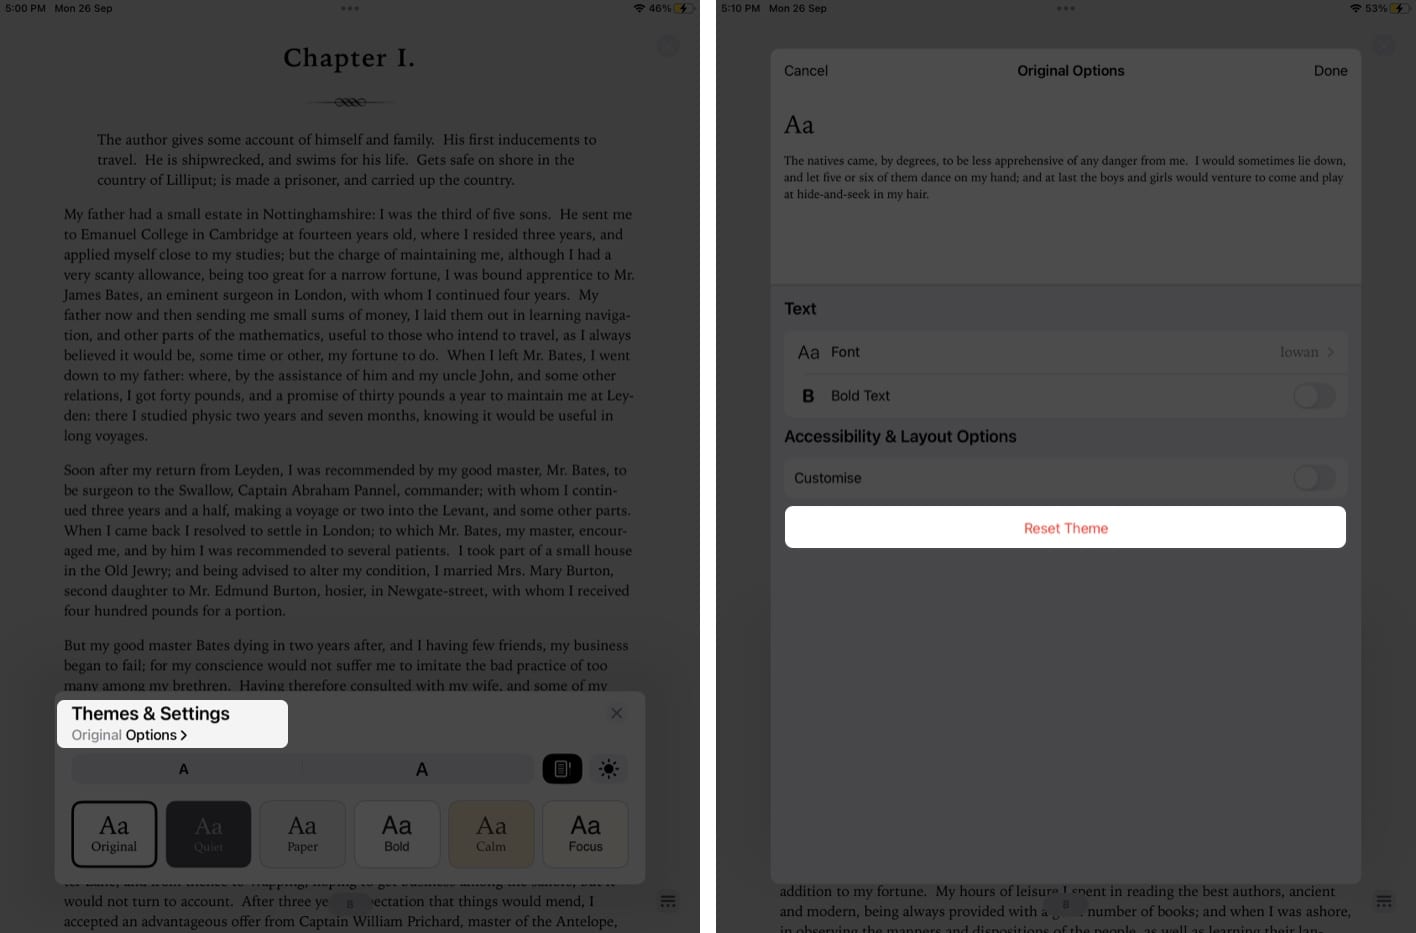 Steps to Reset Theme in Books app on an iPad 